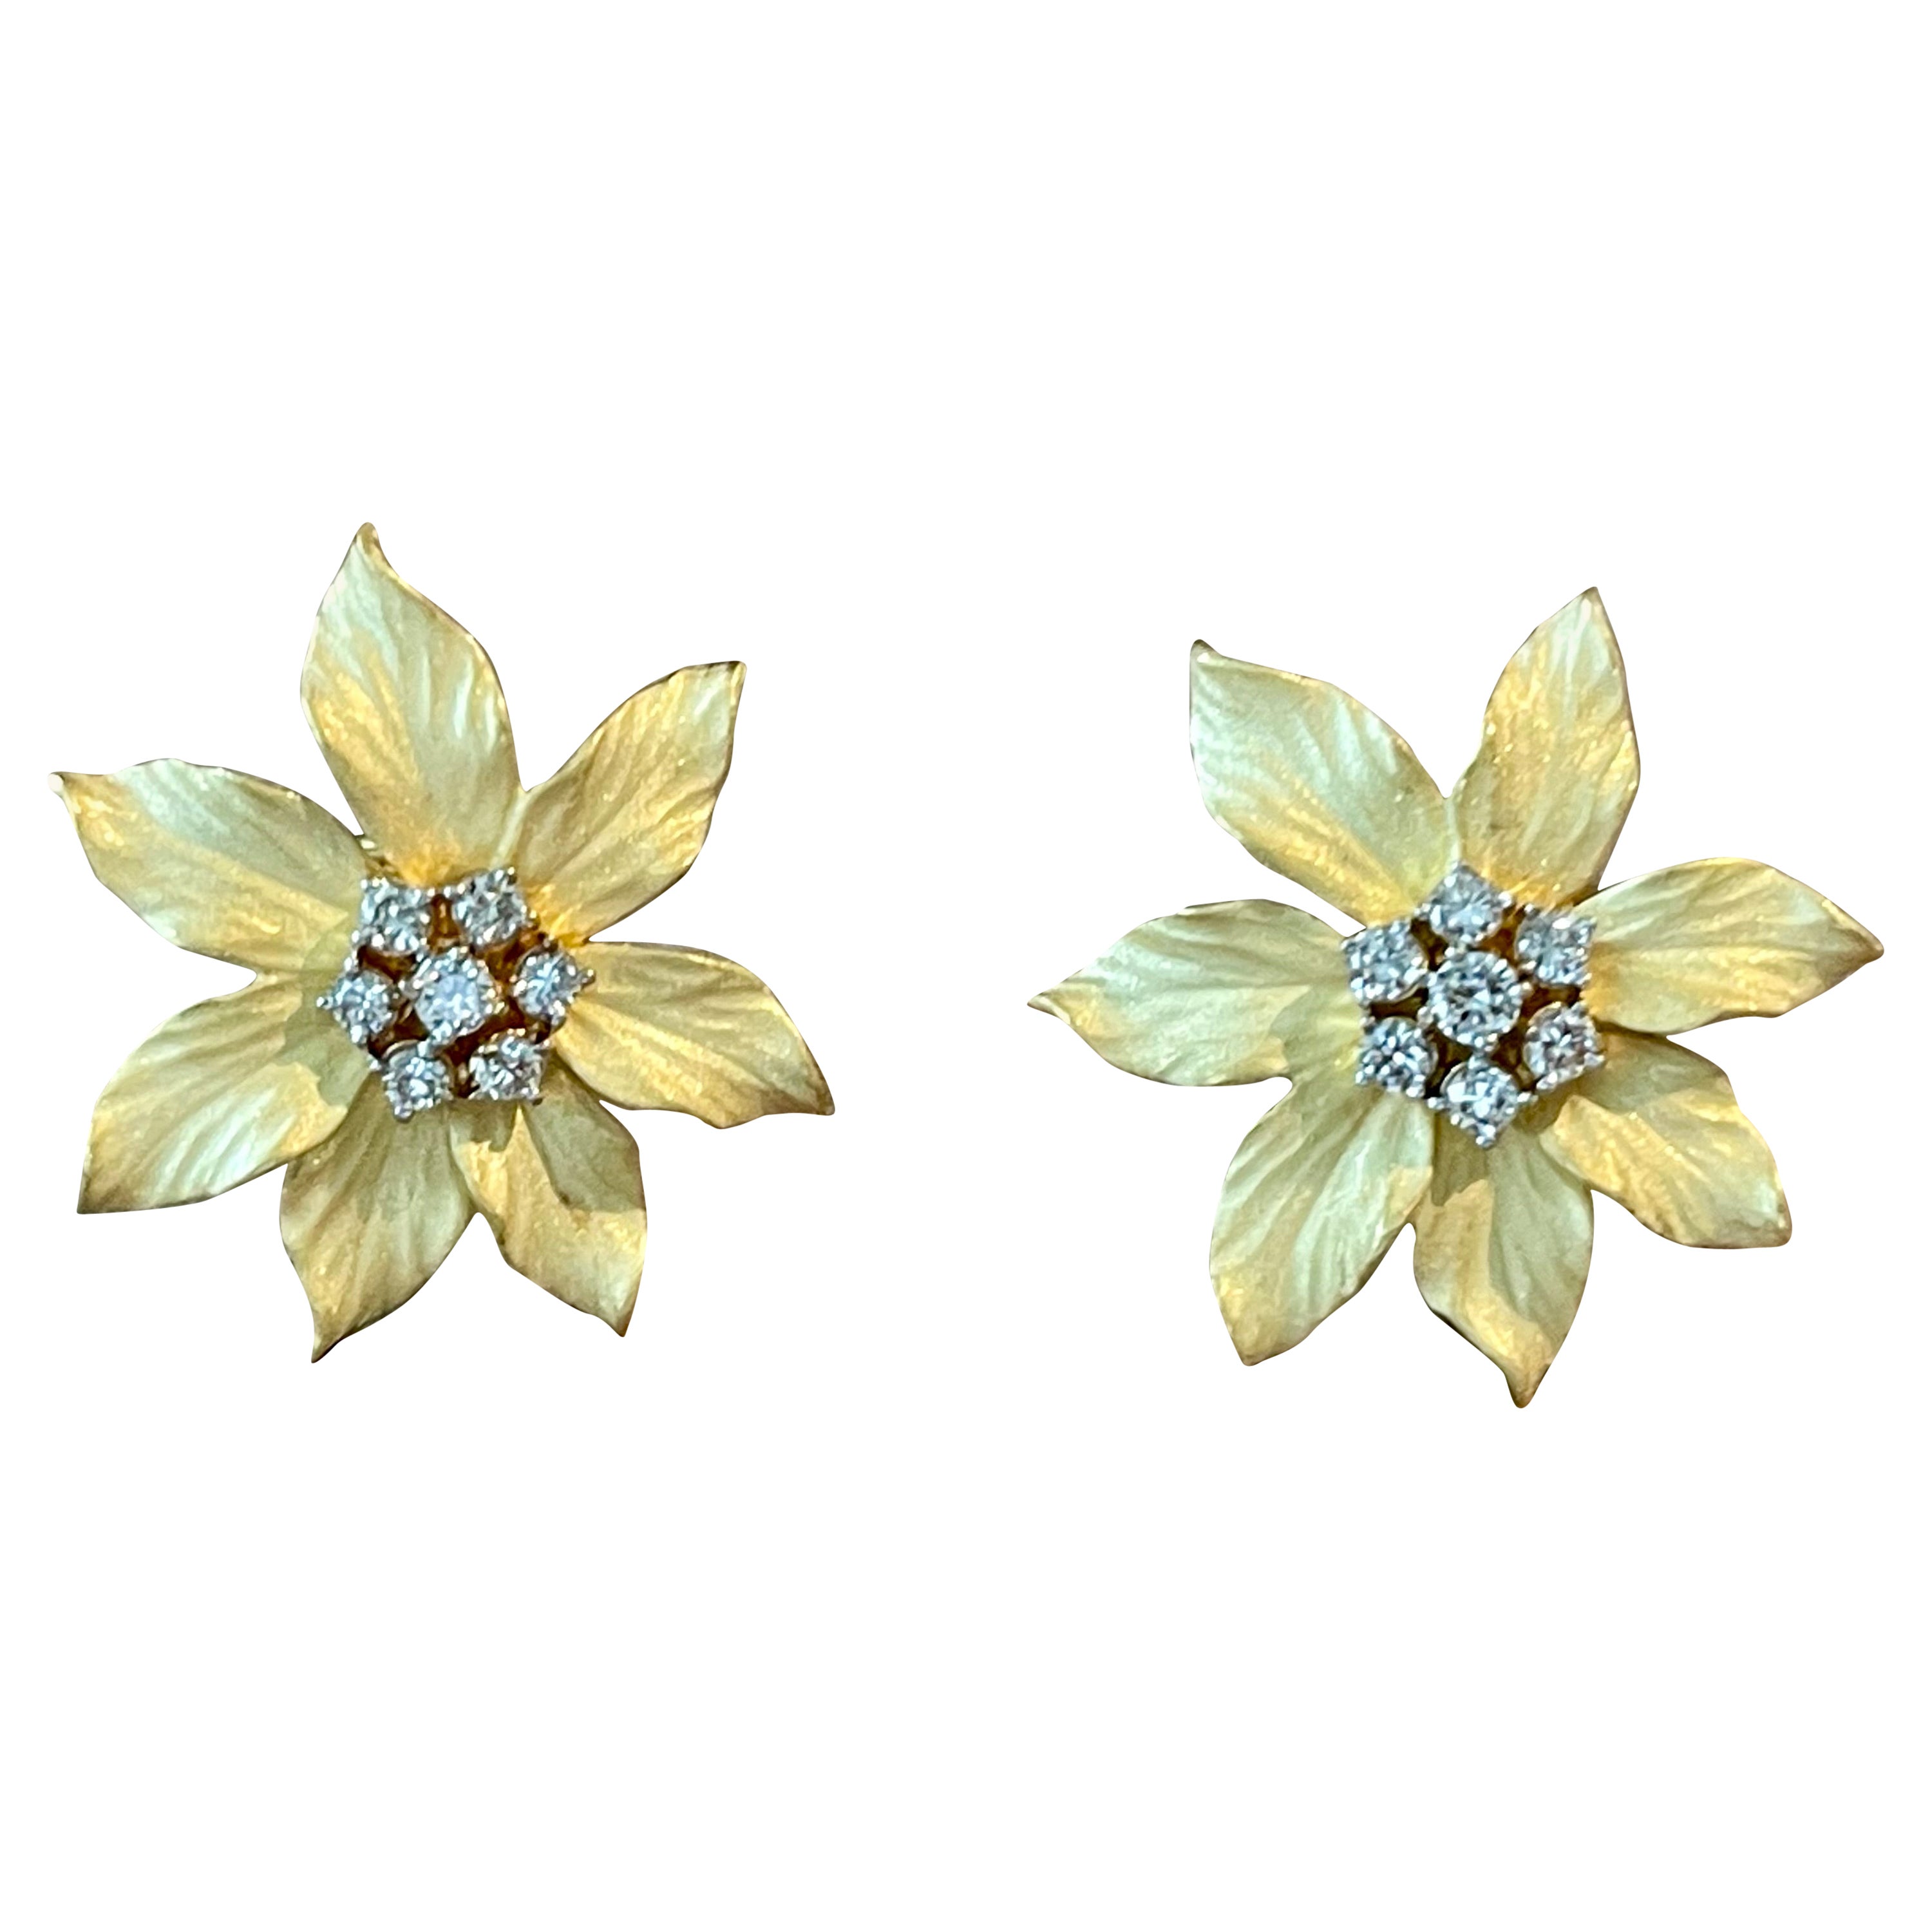 A pair of 18 K yellow brushed Gold flower Diamond earrings